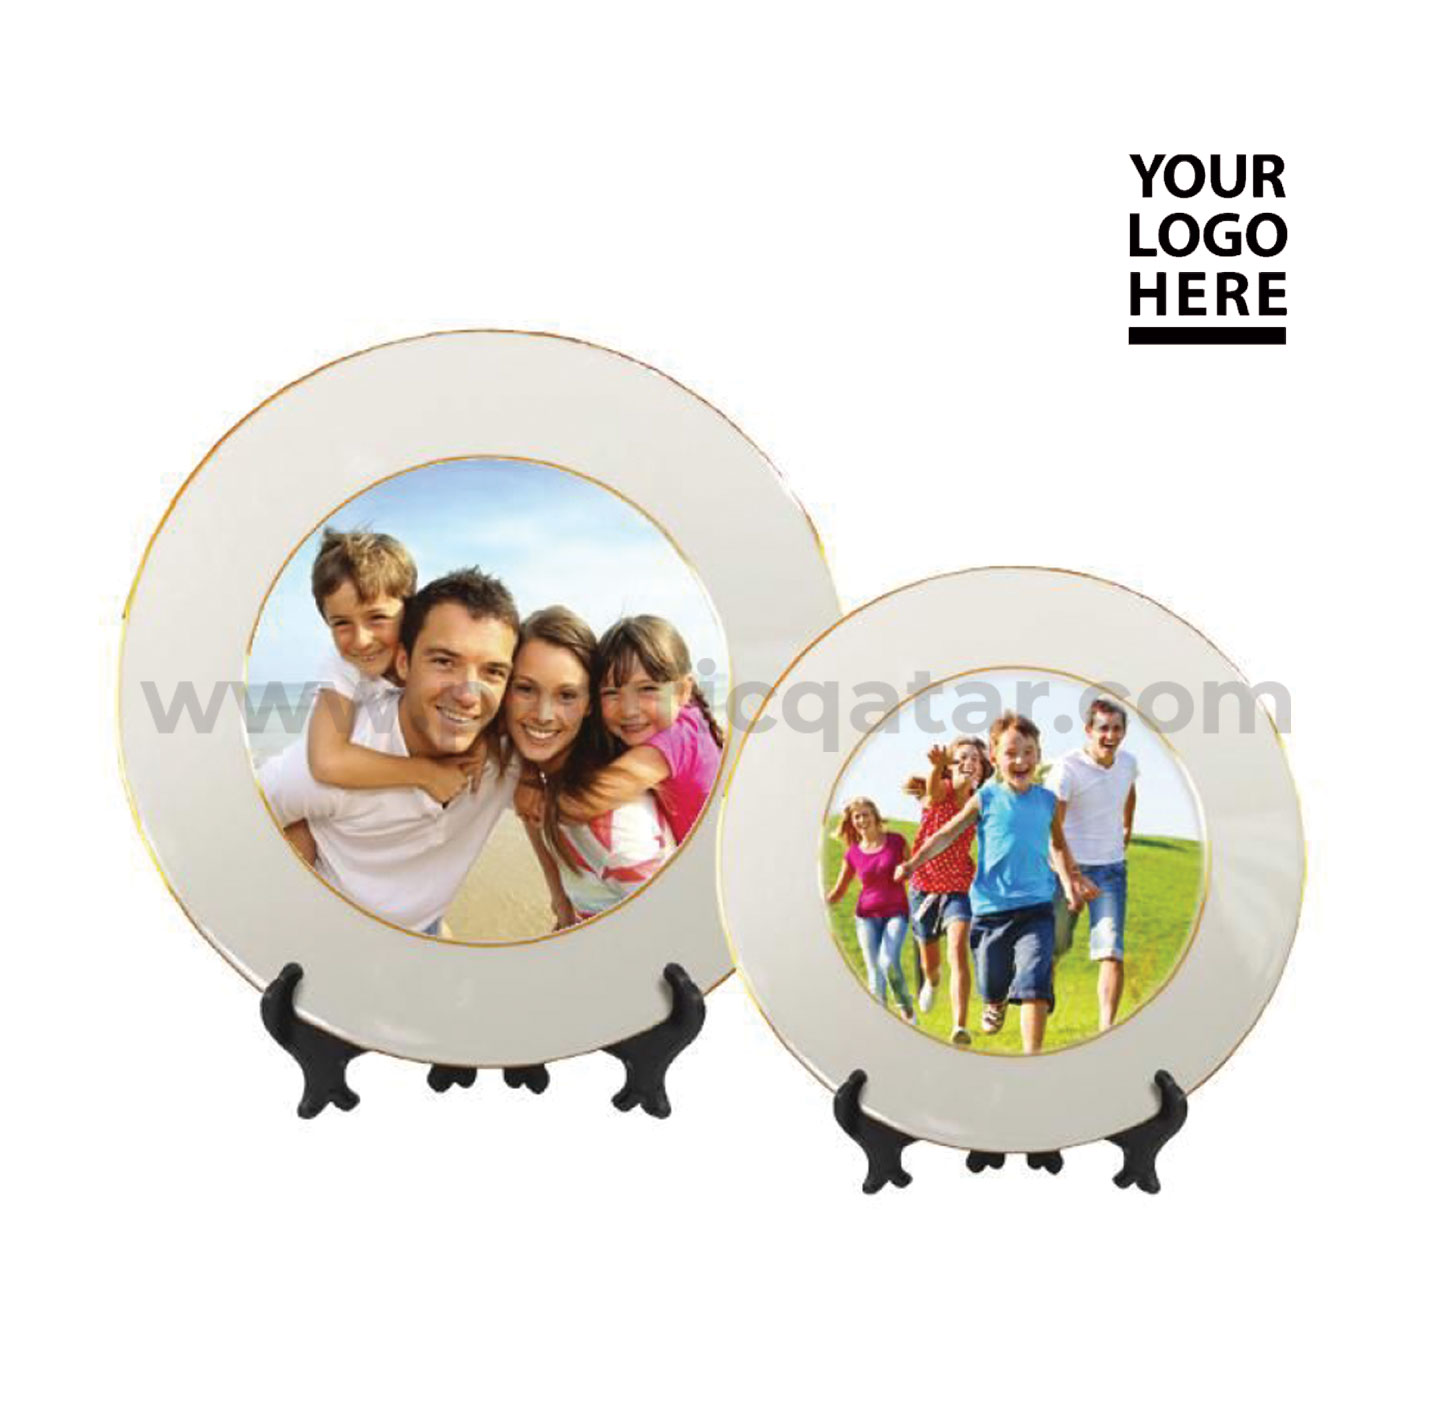 Ceramic Plates with personalized logo sublimation